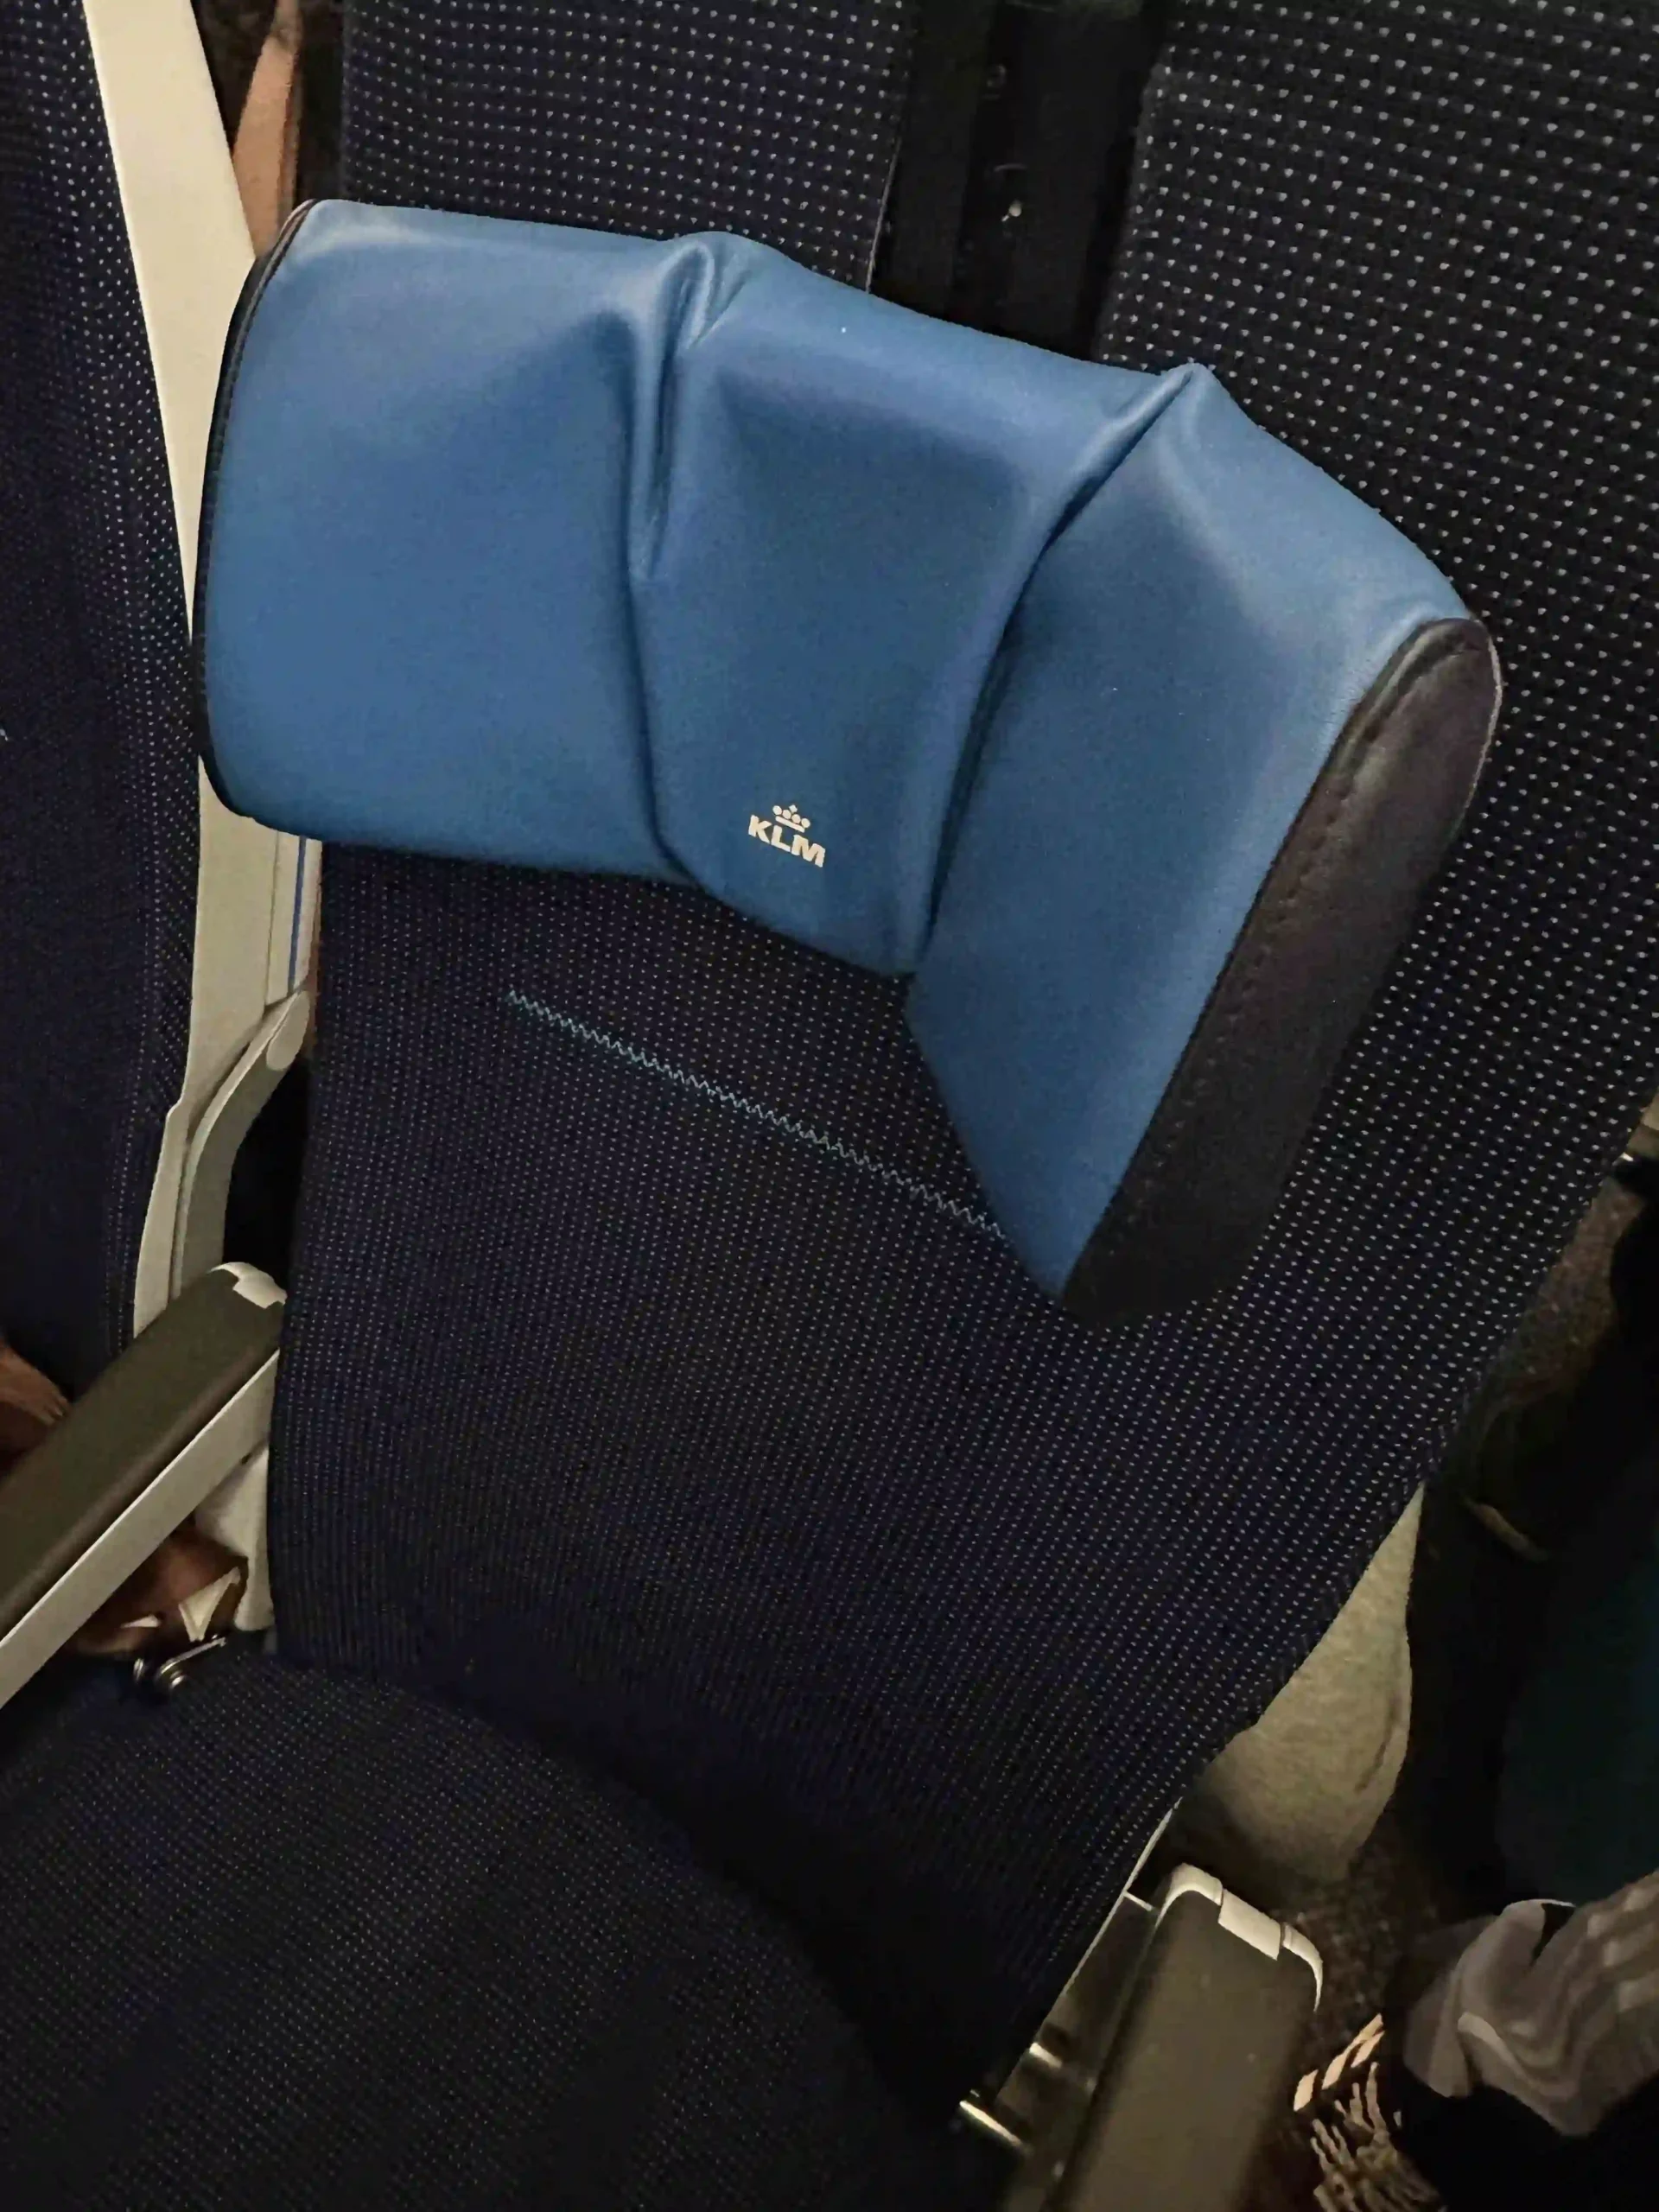 a blue head rest on a seat